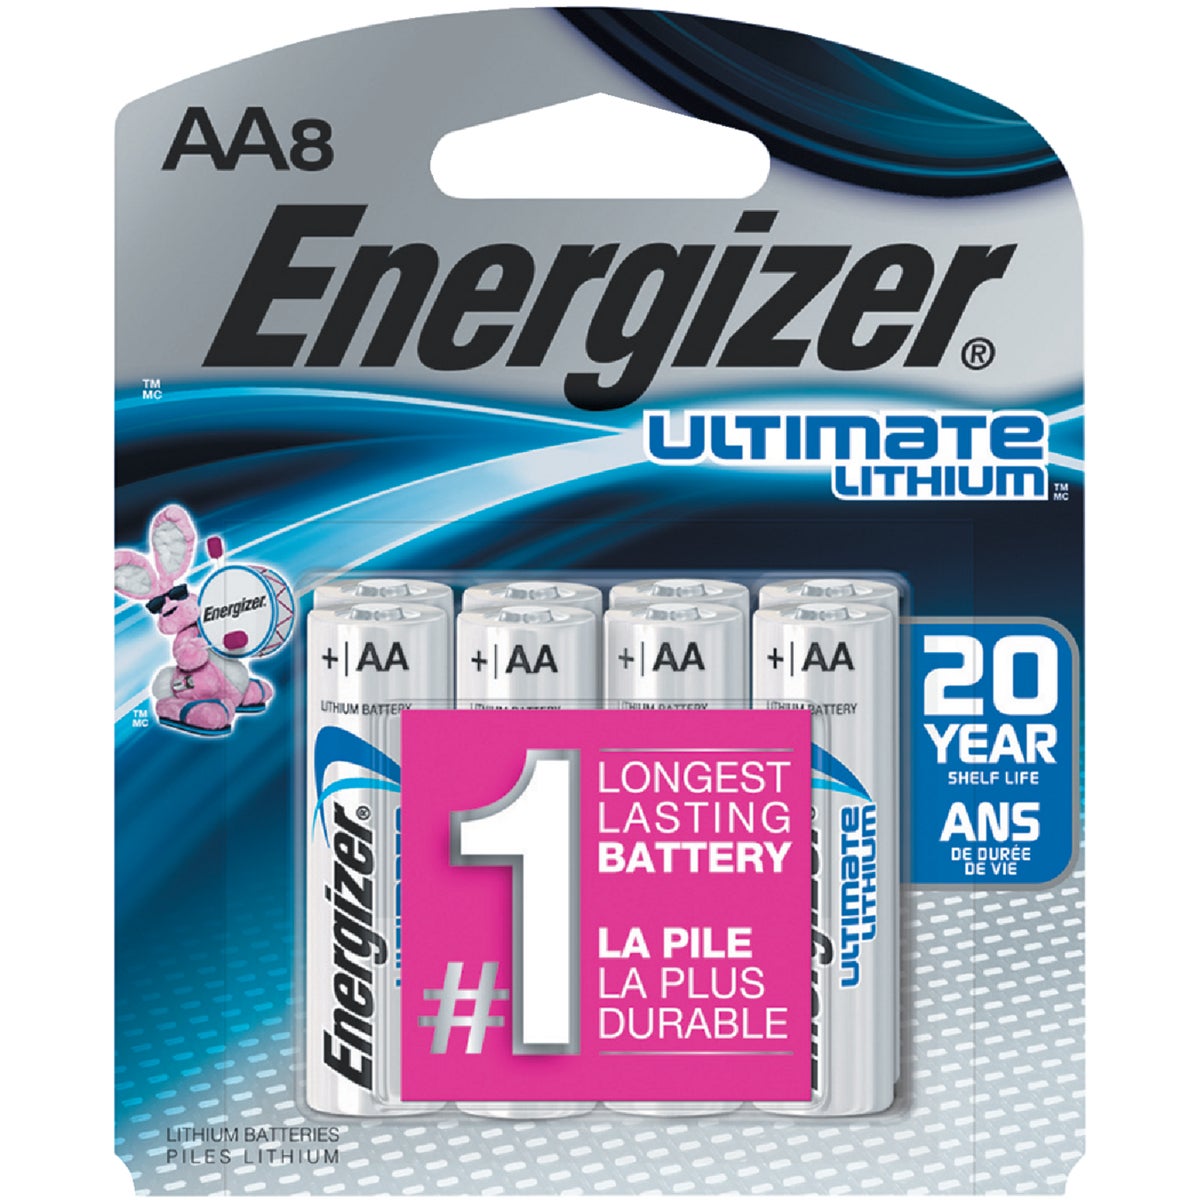 Energizer Ultimate AA Lithium Battery (8-Pack)